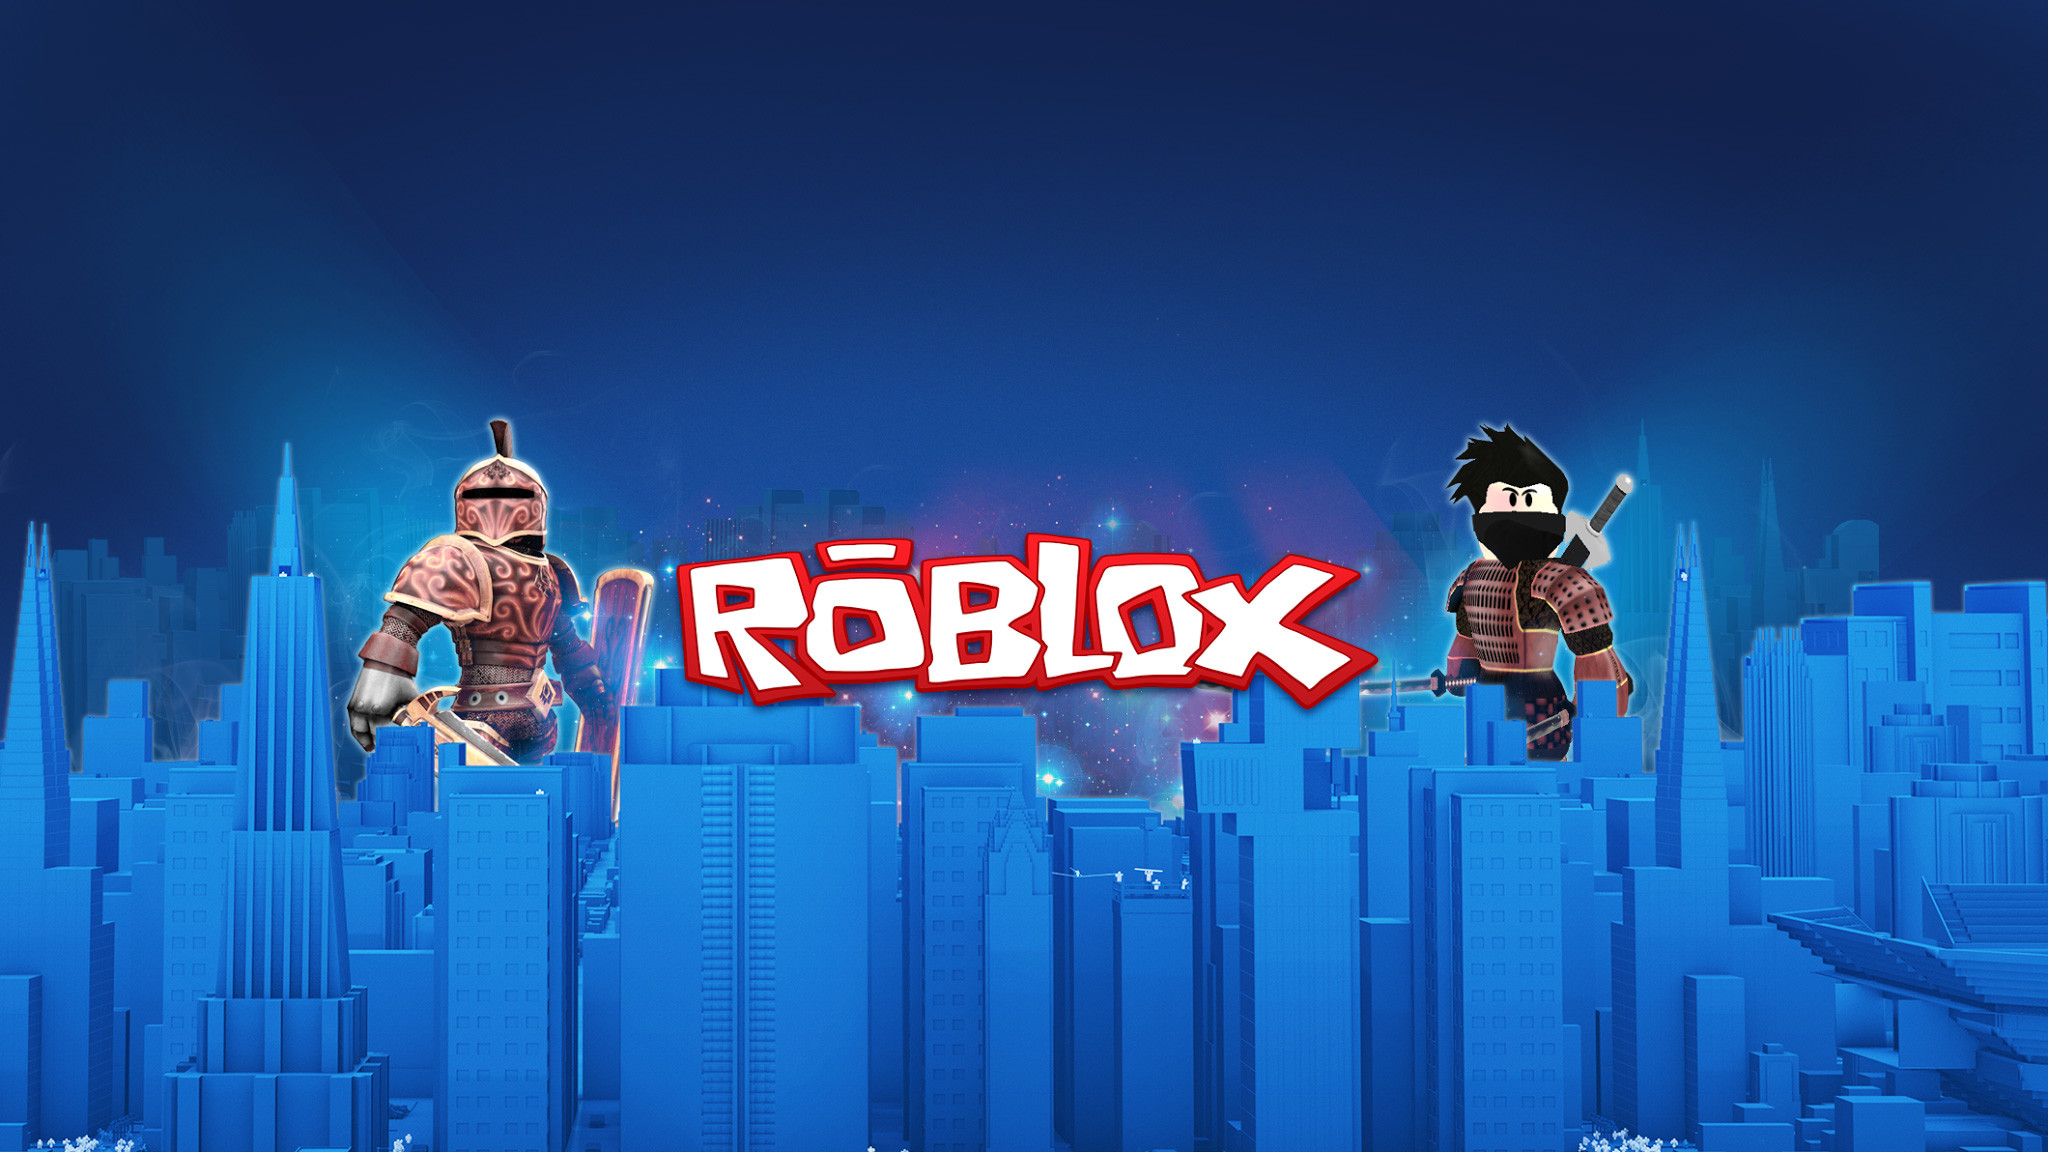 Roblox wide screen background blue